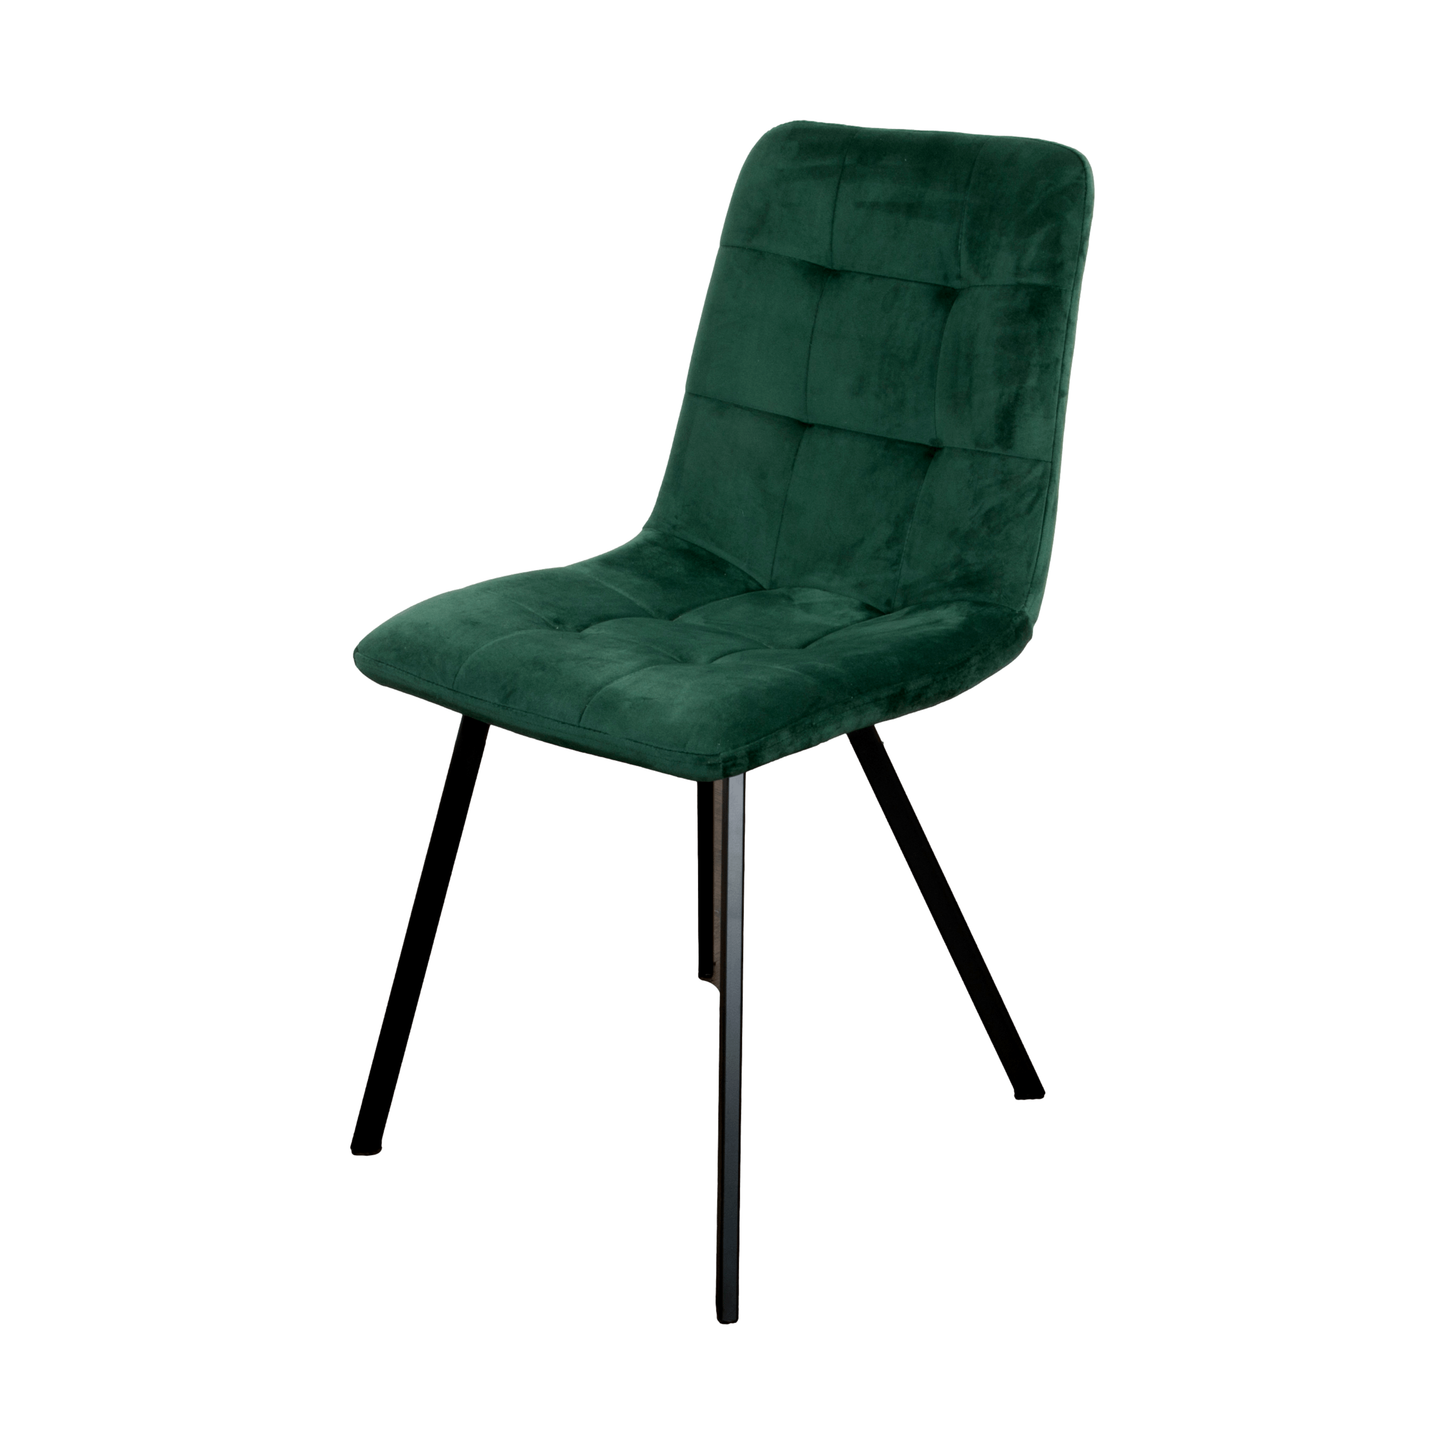 Squared Green Dining Chairs (set of 2)